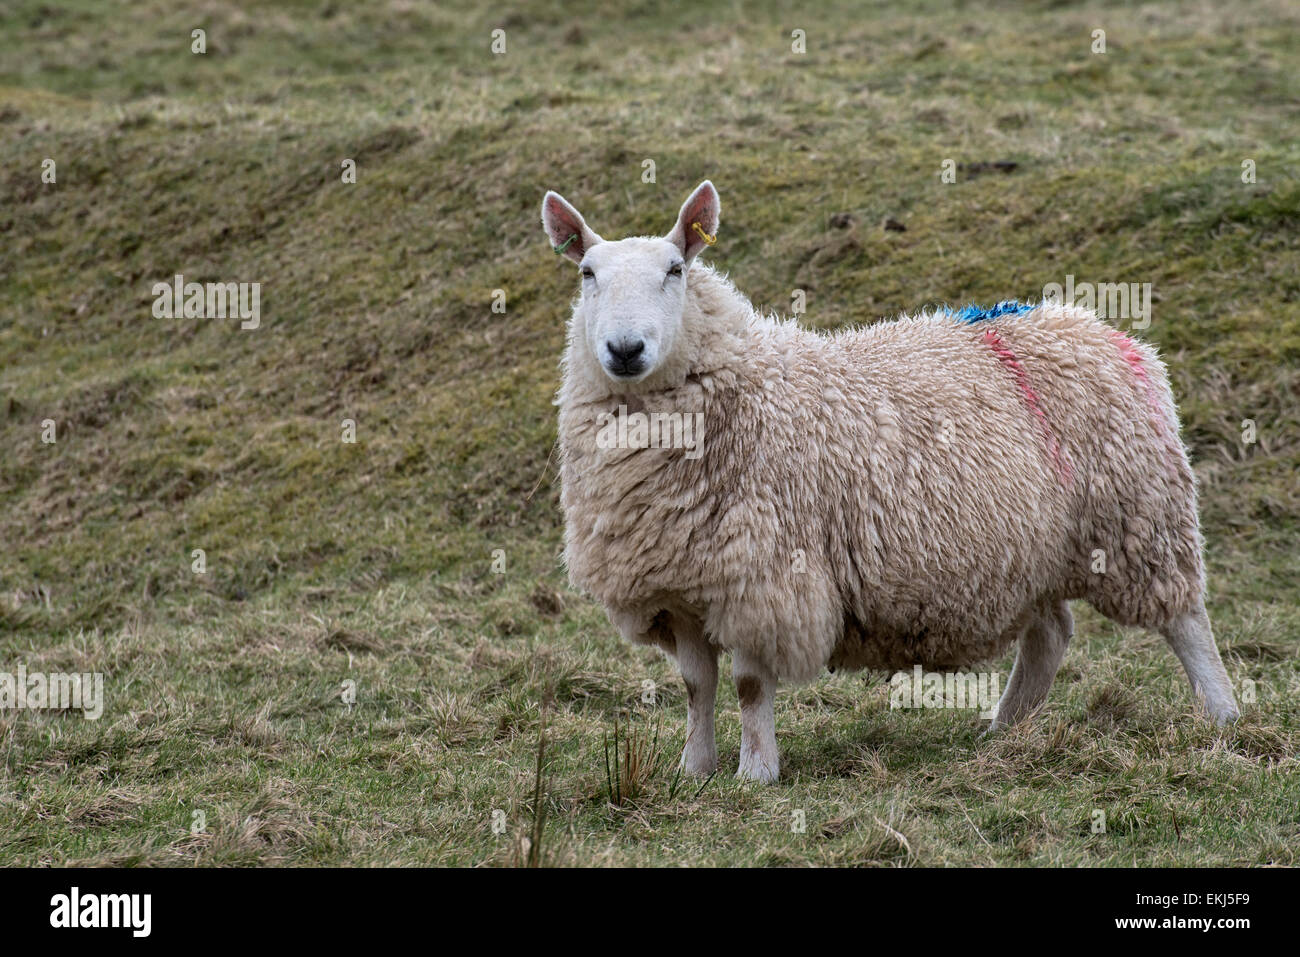 Sheep in the lake district in winter. The sheep is looking towards the camera Stock Photo